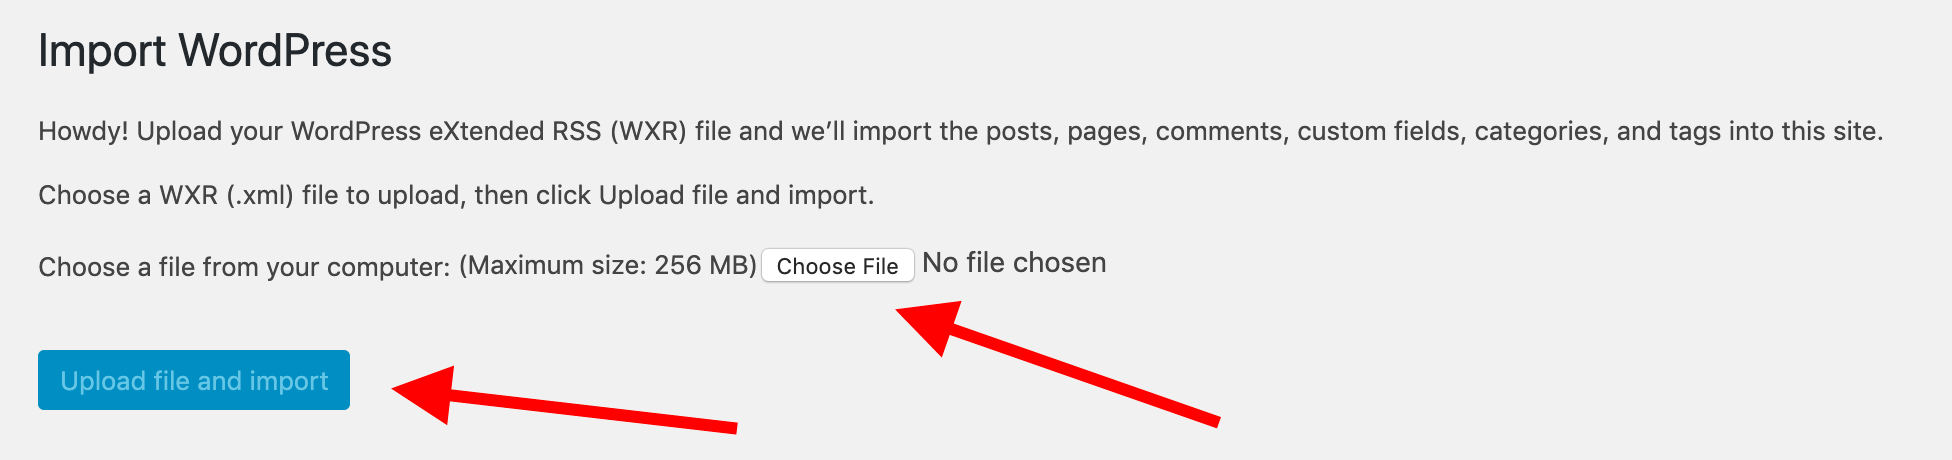 upload your import file